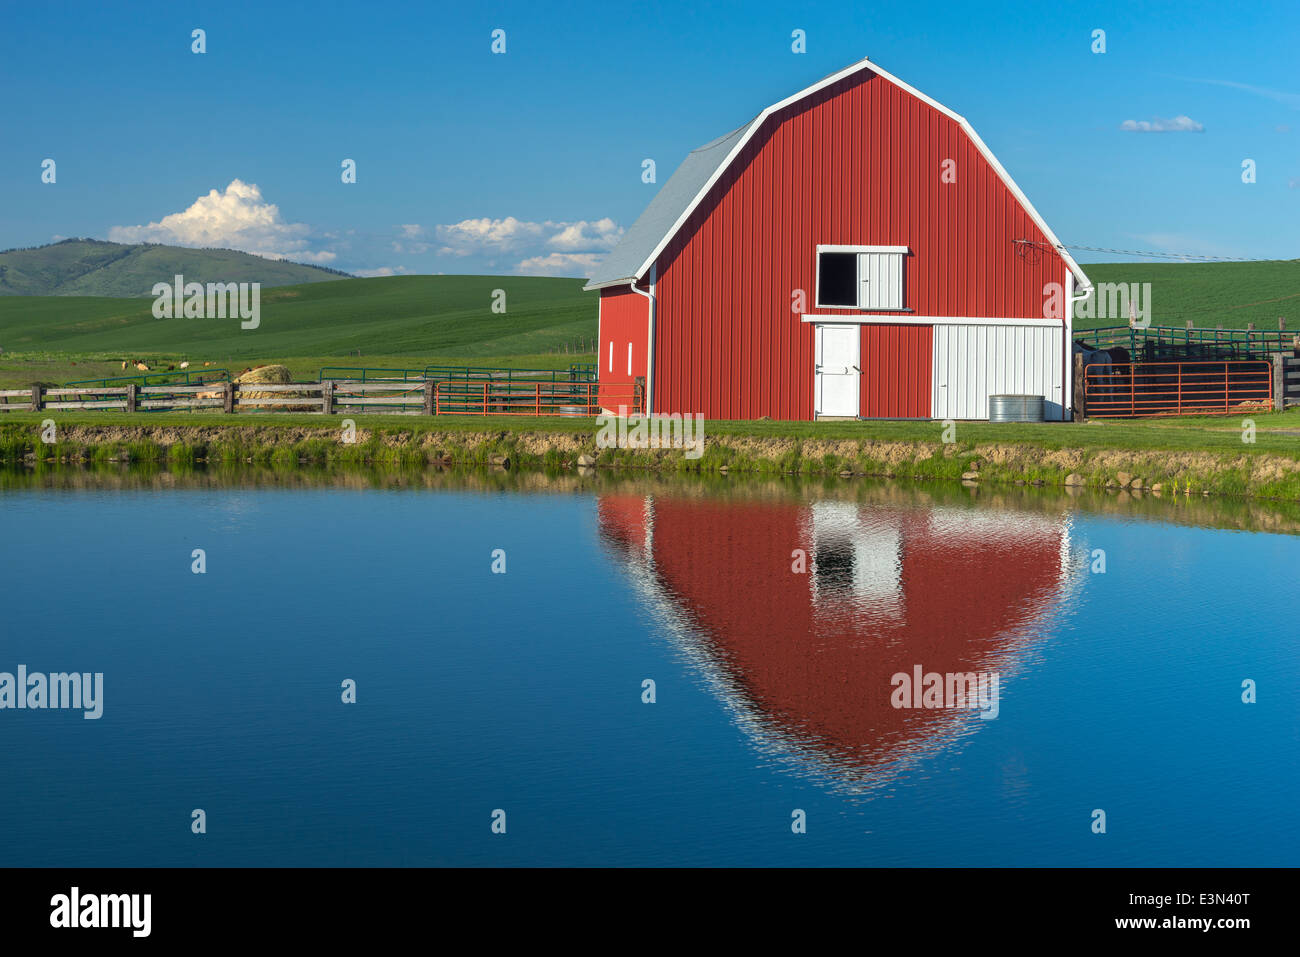 The Palouse, Whitman County, WA: Red barn and pond reflection Stock Photo